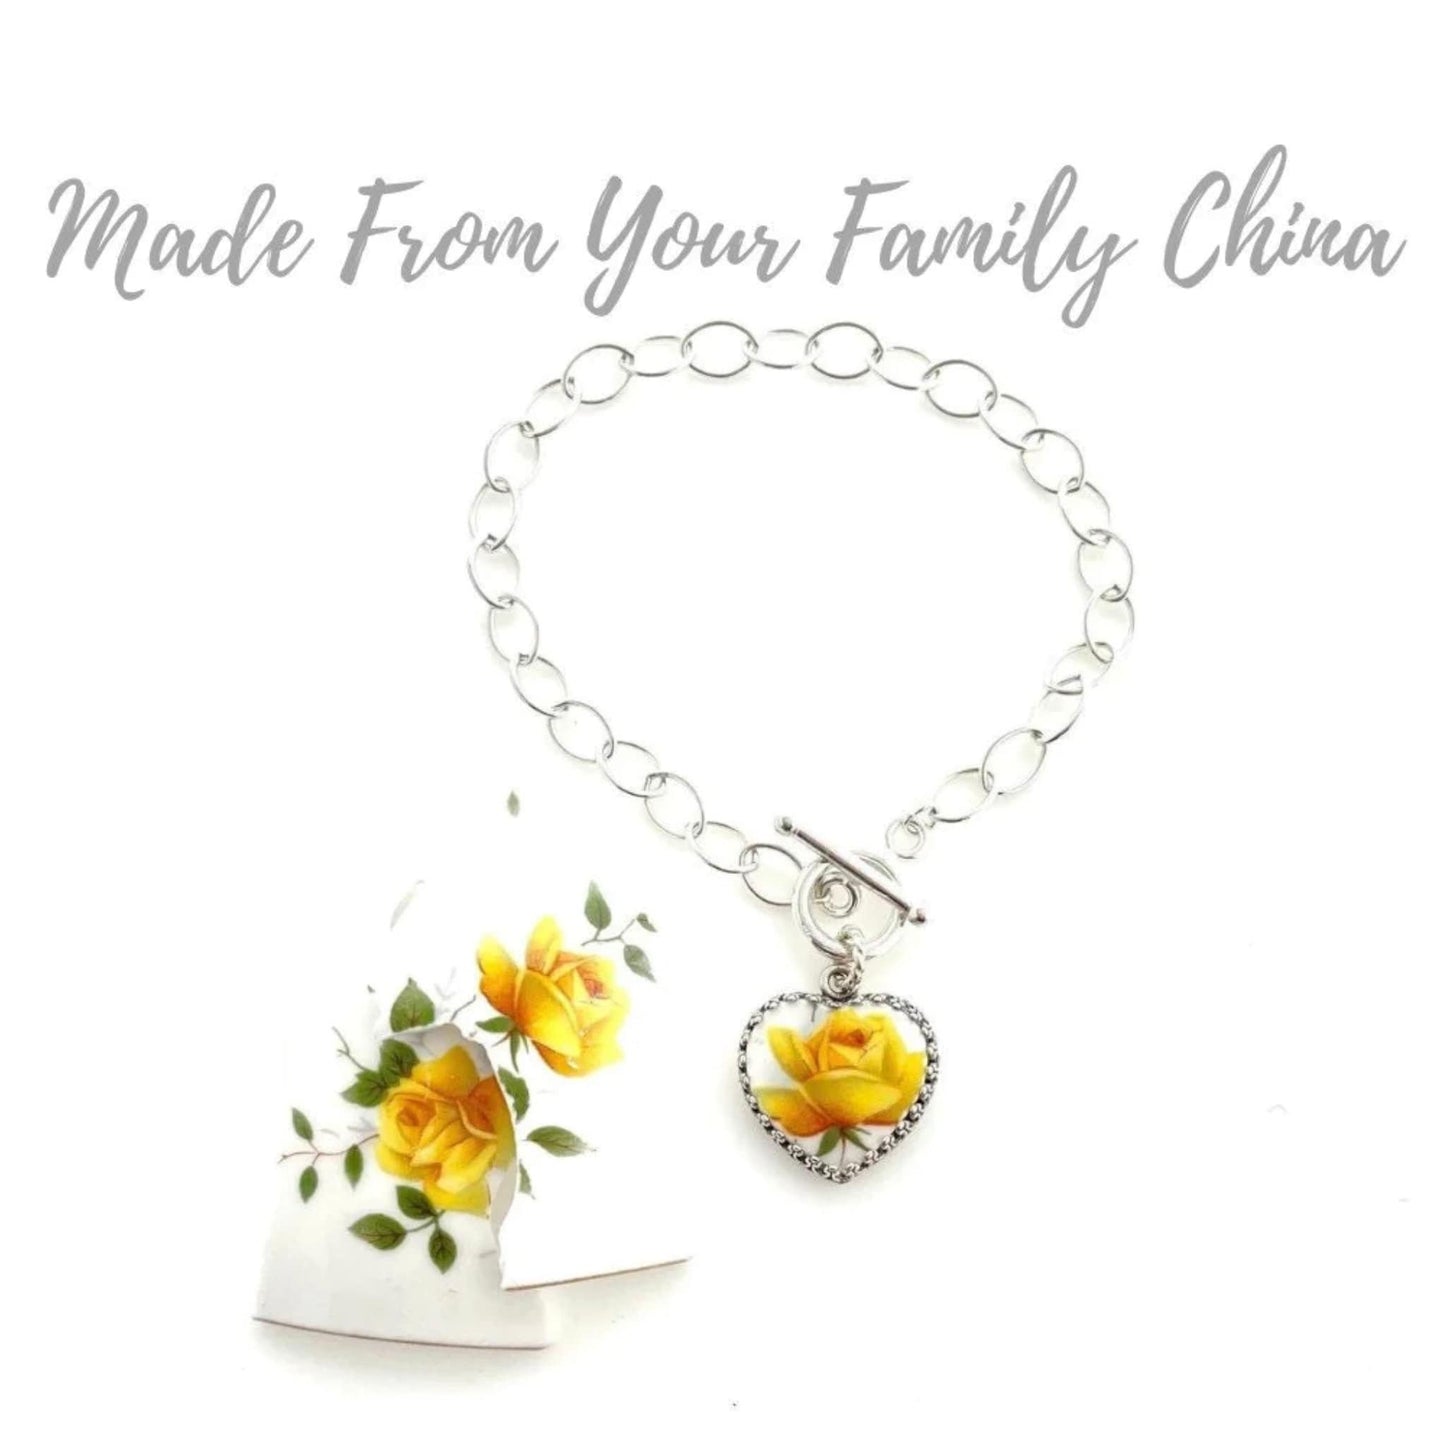 CUSTOM ORDER Toggle Silver Link China Charm Bracelet, Custom Memorial Broken China Jewelry, Mom Gift, Family Jewelry, Made From Your China